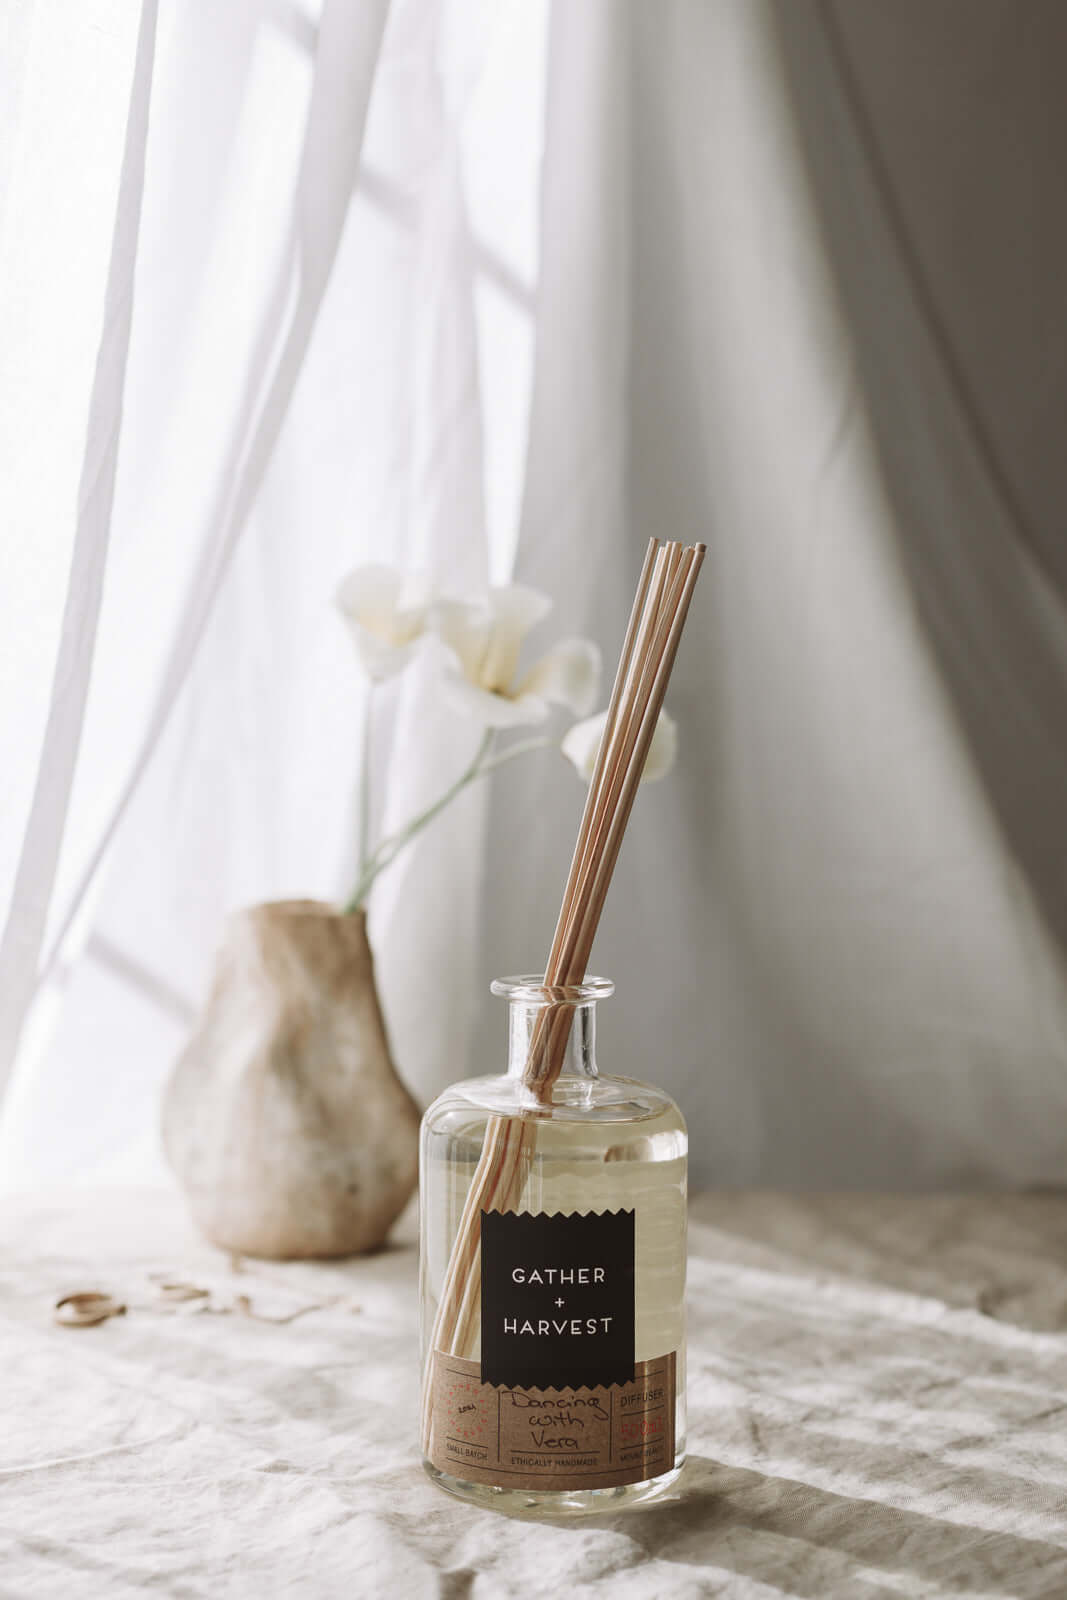 Our natural reed diffuser Dancing with Vera is perfect for 12+ months of subtle scents for your home